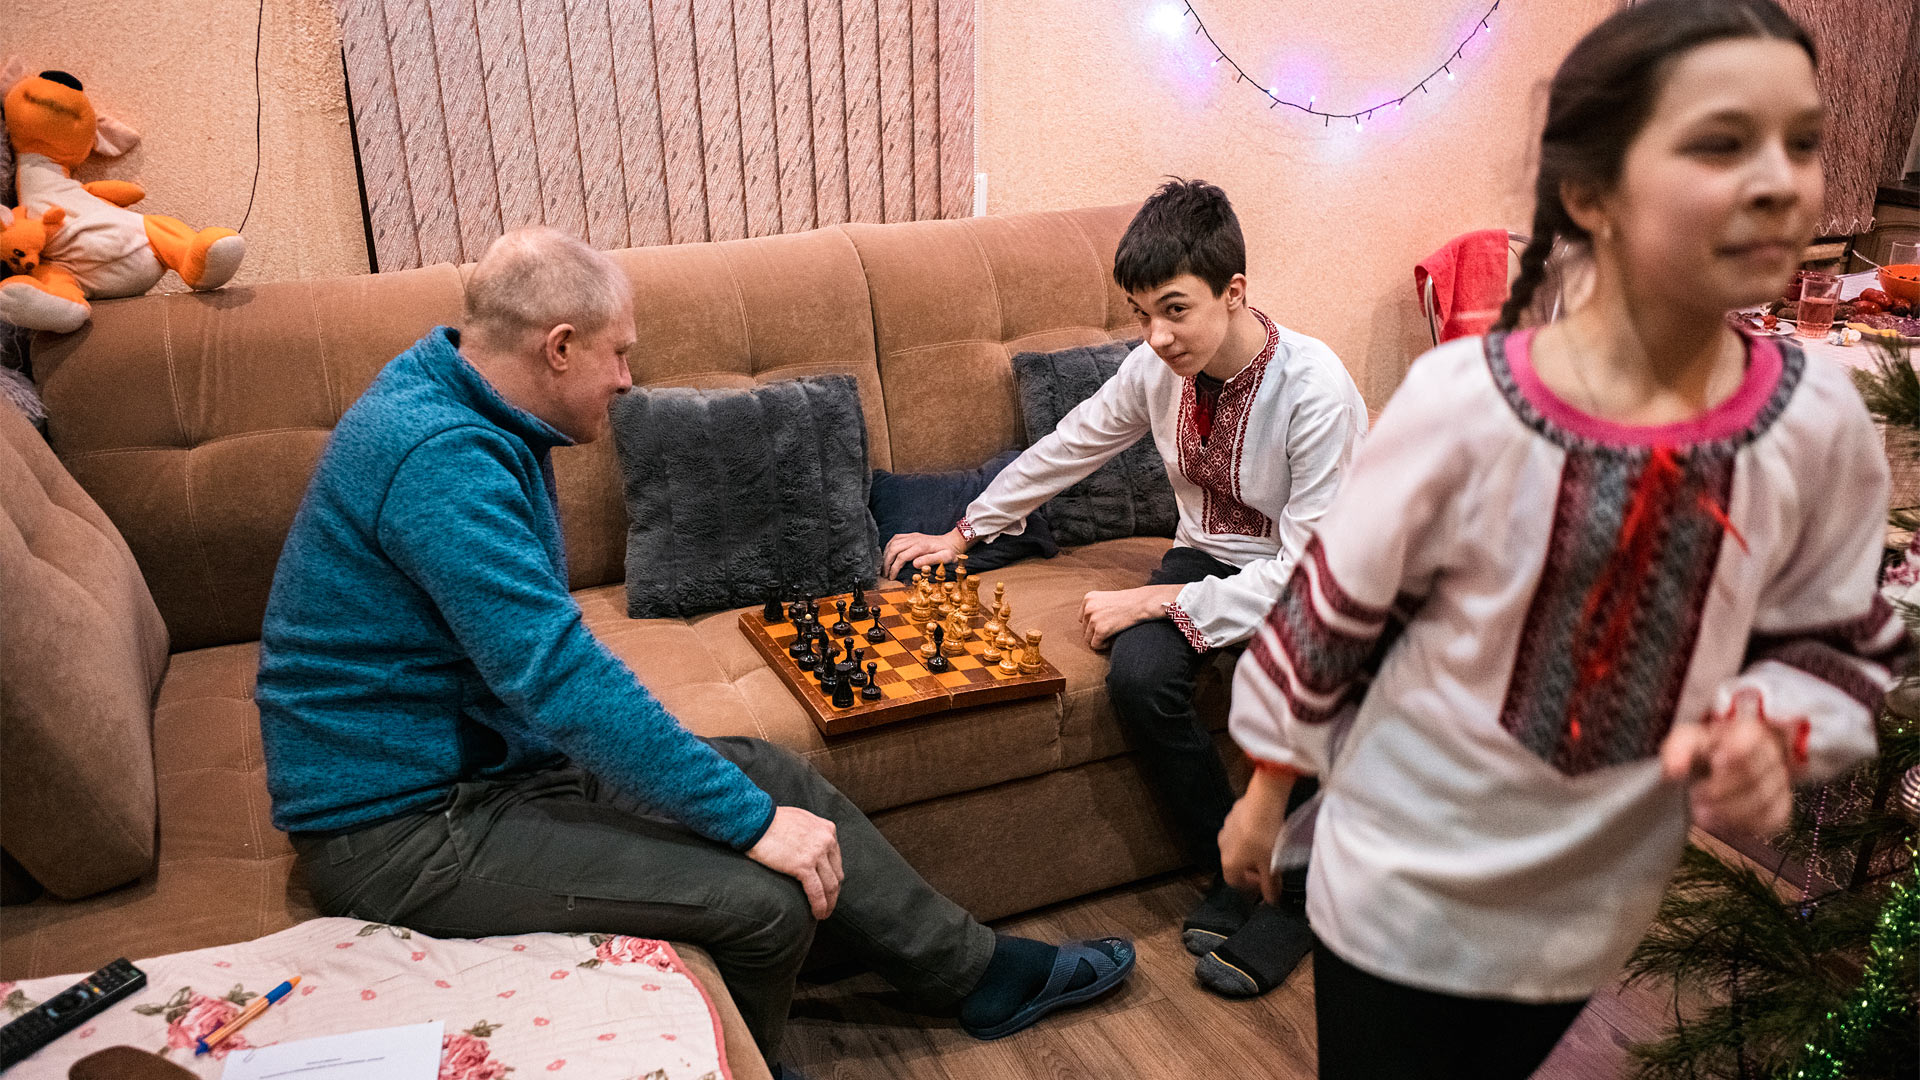 A man and a teenaged boy sit on a sofa with a chessboard between them. A girl in the foreground walks out of the shot.